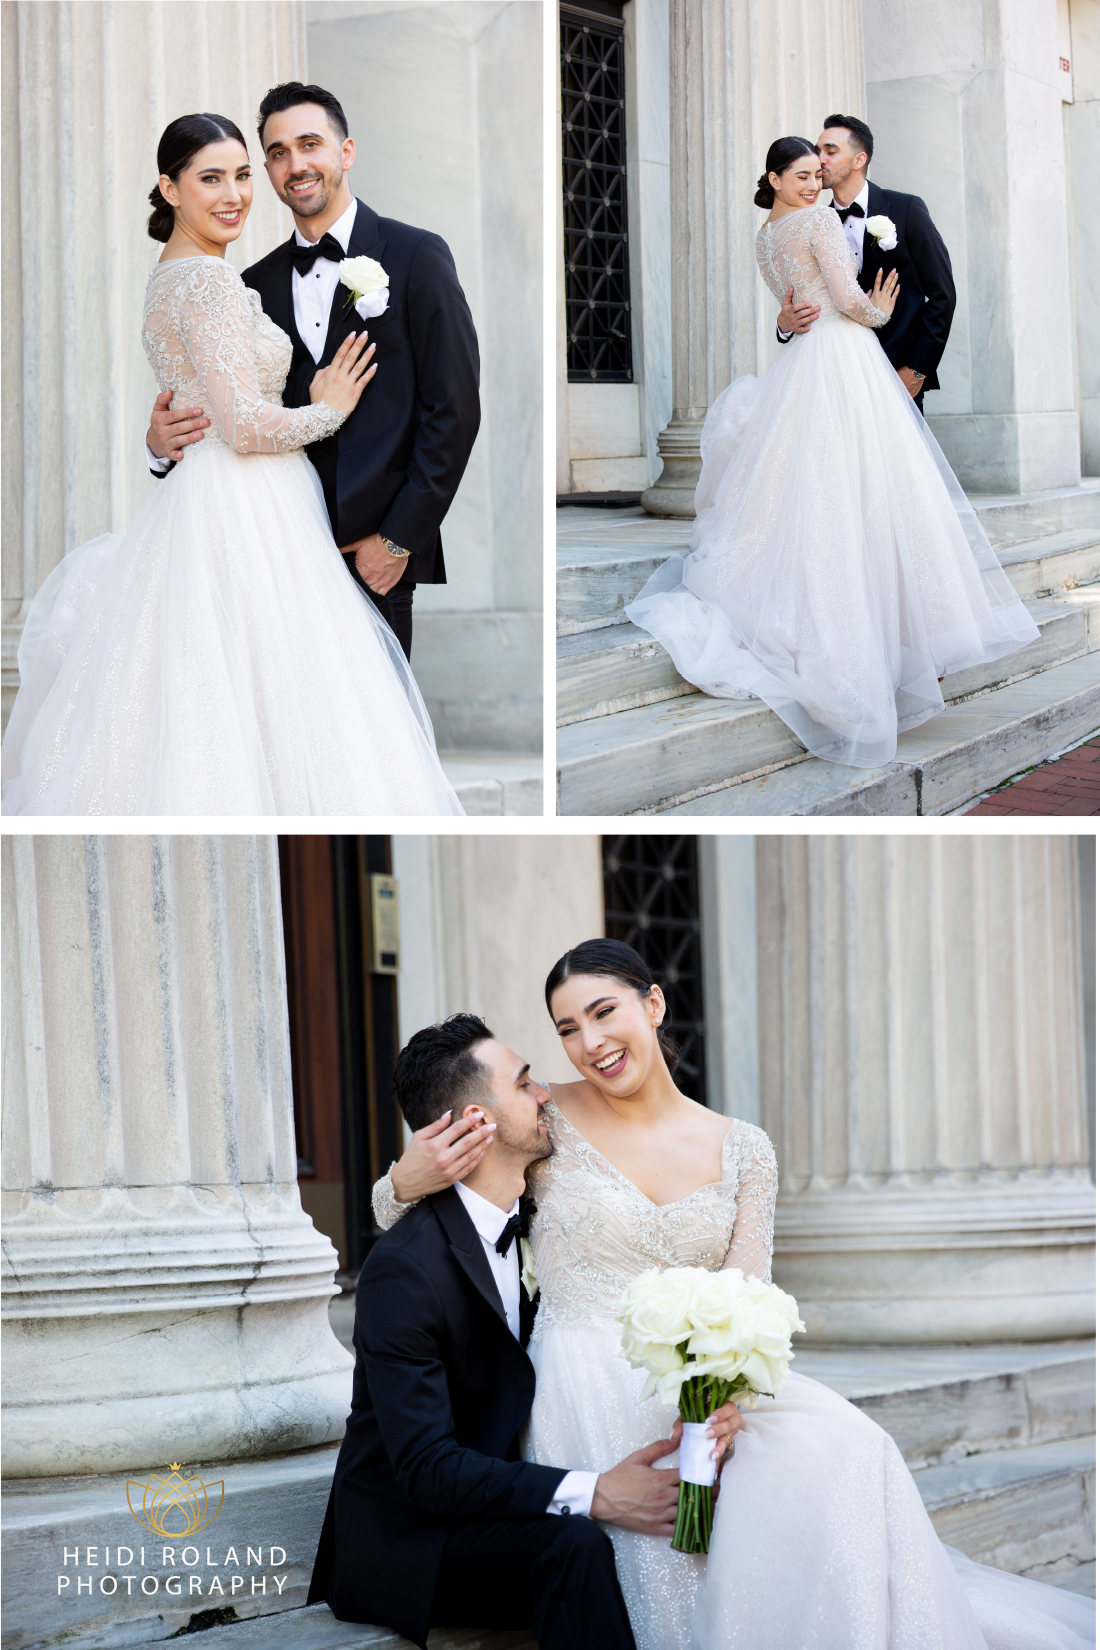 Bride and groom portraits in front of marble columns by Heidi Roland Photography